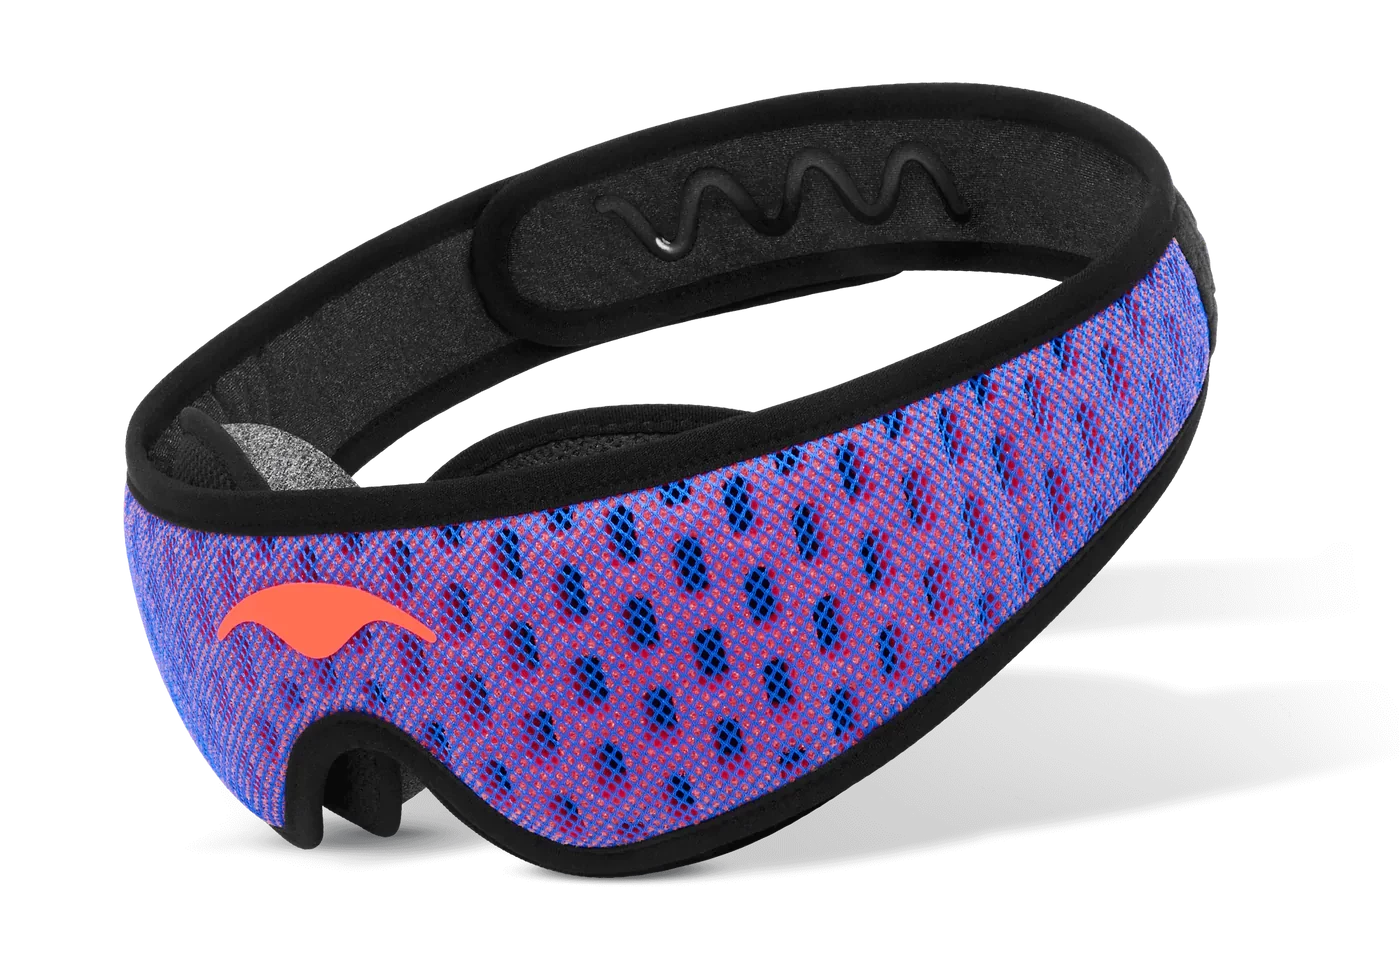 A blue mesh sleep mask with eye cups for stress reduction.